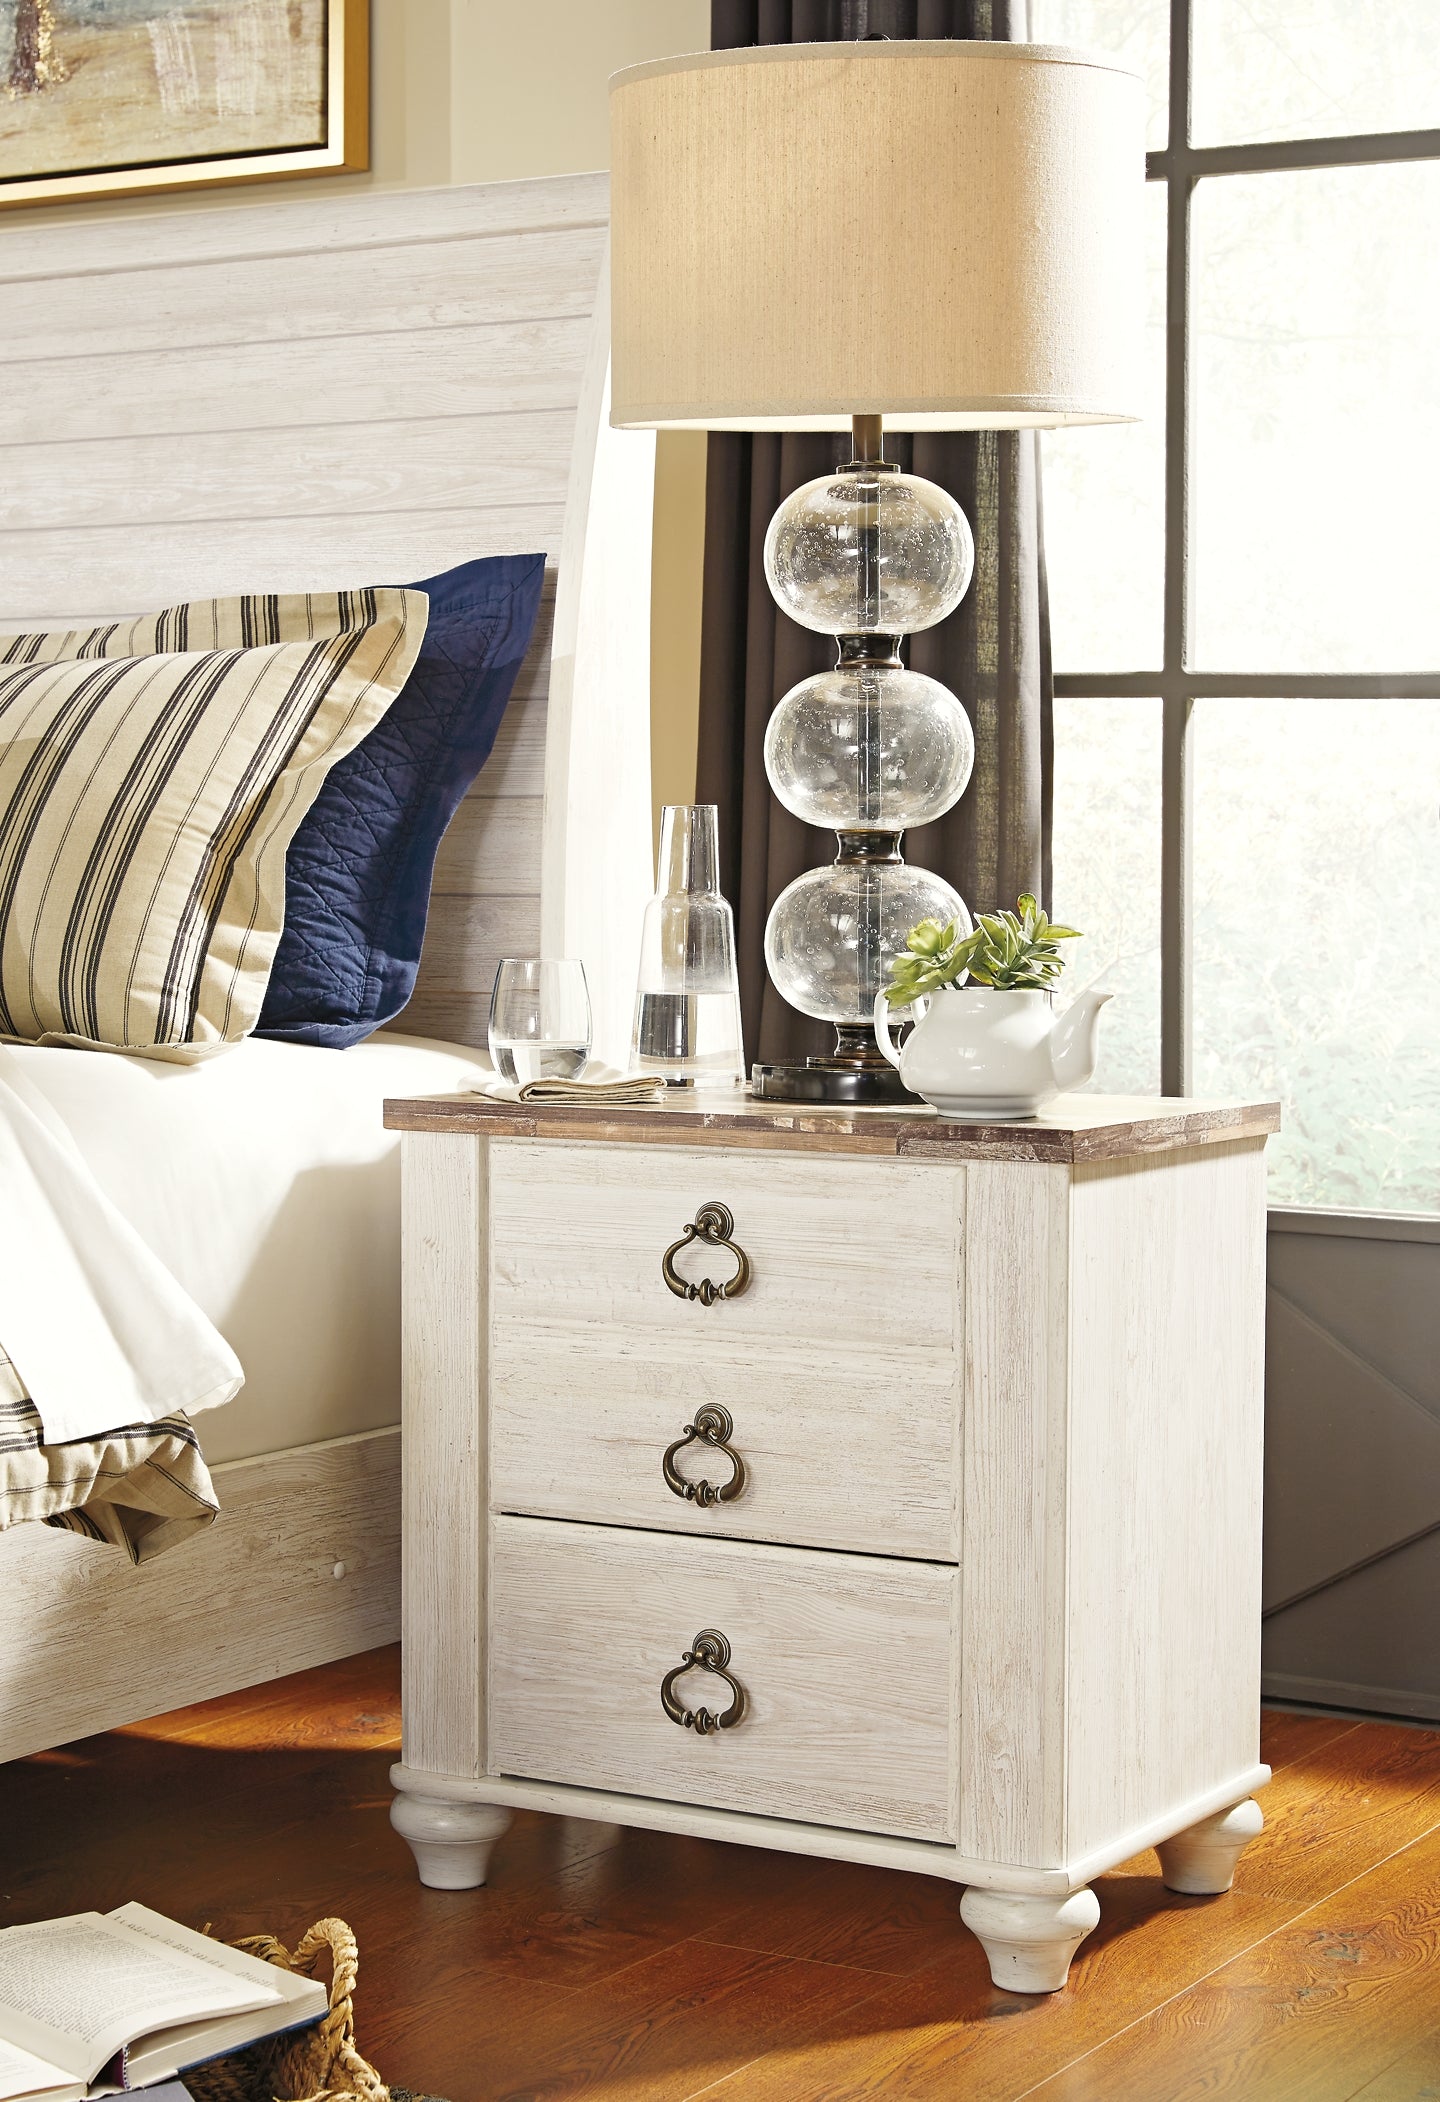 Willowton Queen Panel Bed with Dresser and Nightstand Signature Design by Ashley®